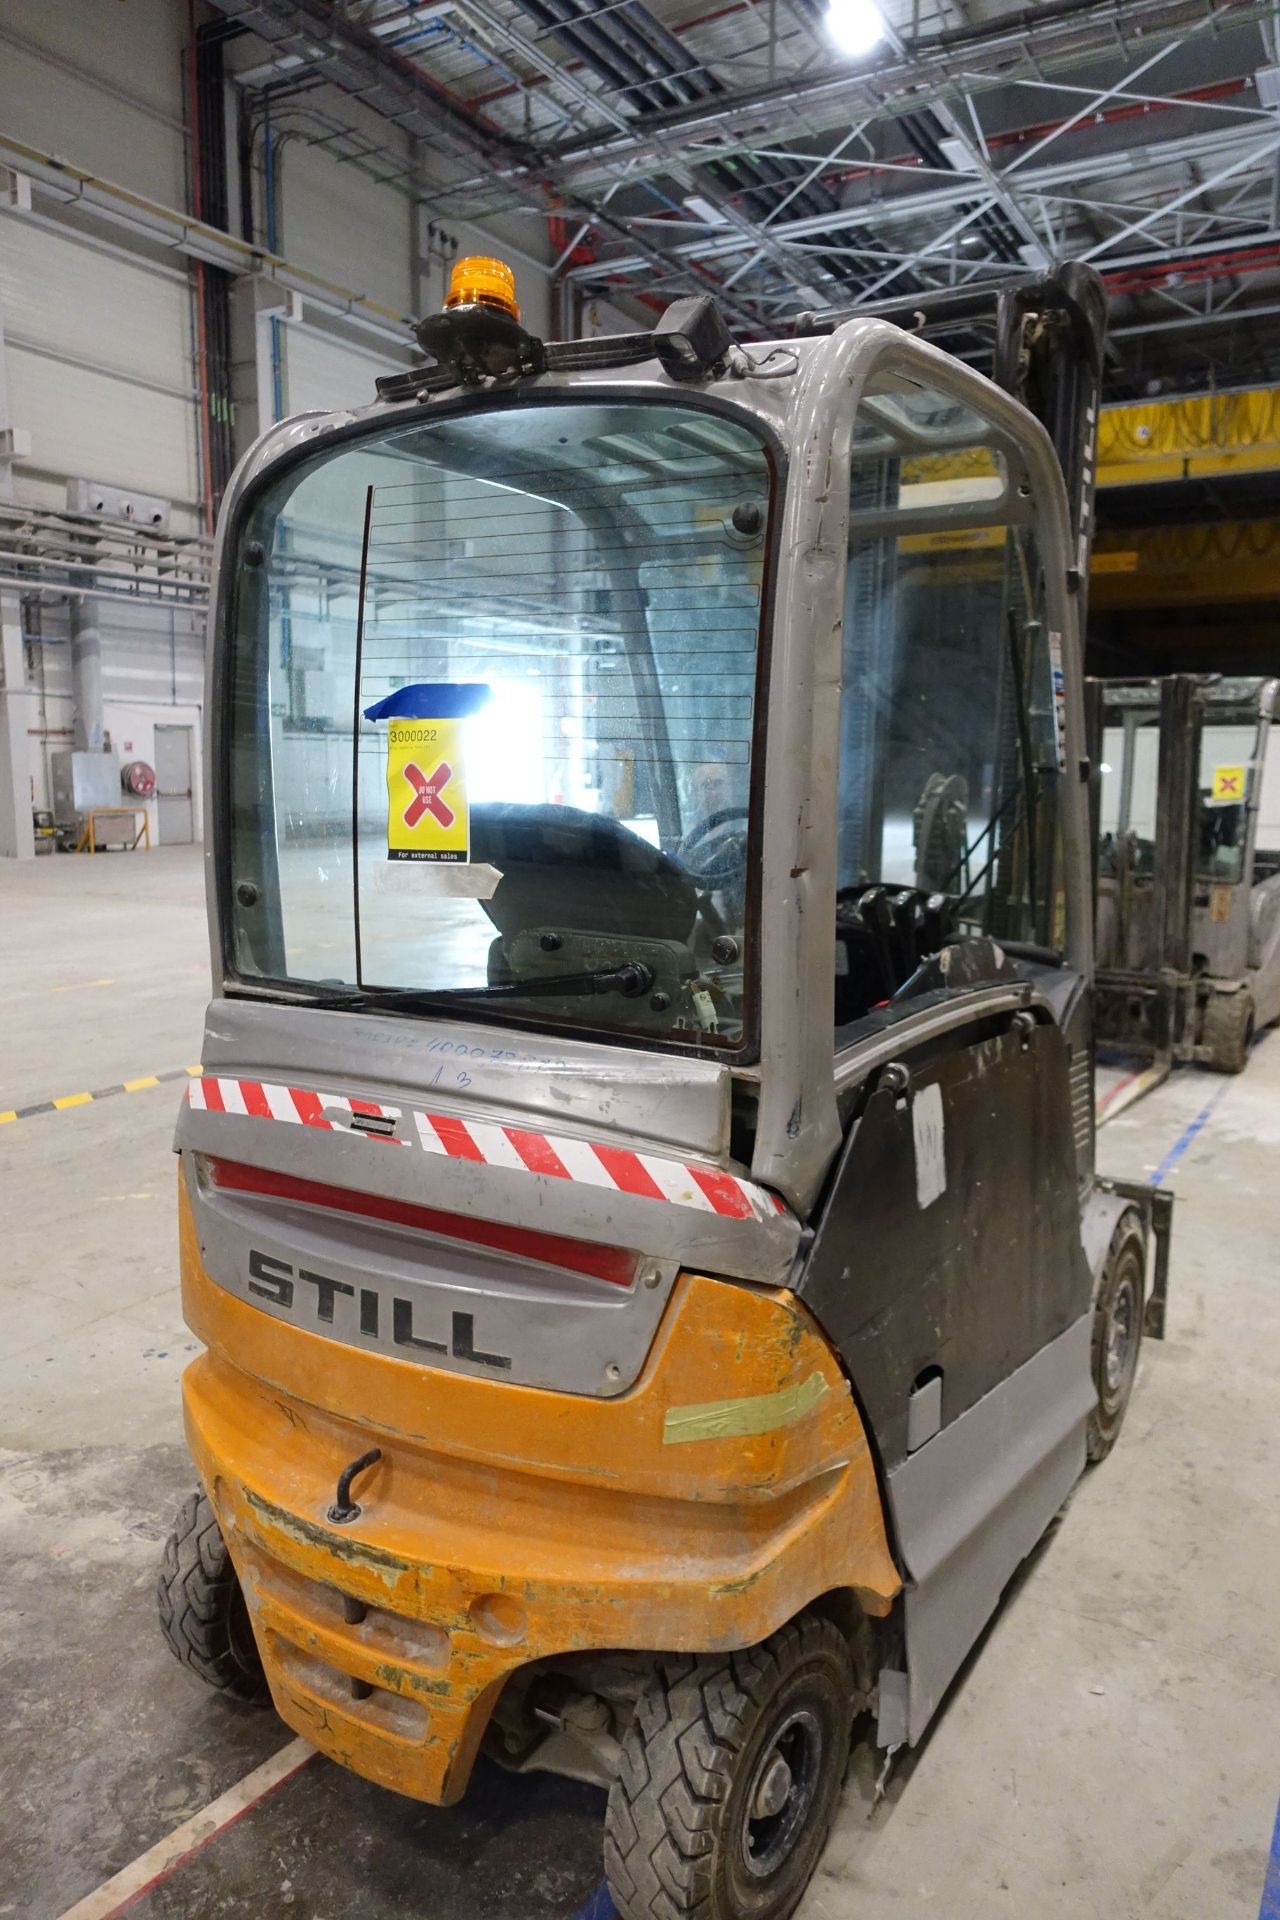 STILL RX60-25 Electric Forklift Truck, 2,500kg Capacity with Sideshift, Asset # 3000022, Ser # - Image 9 of 52